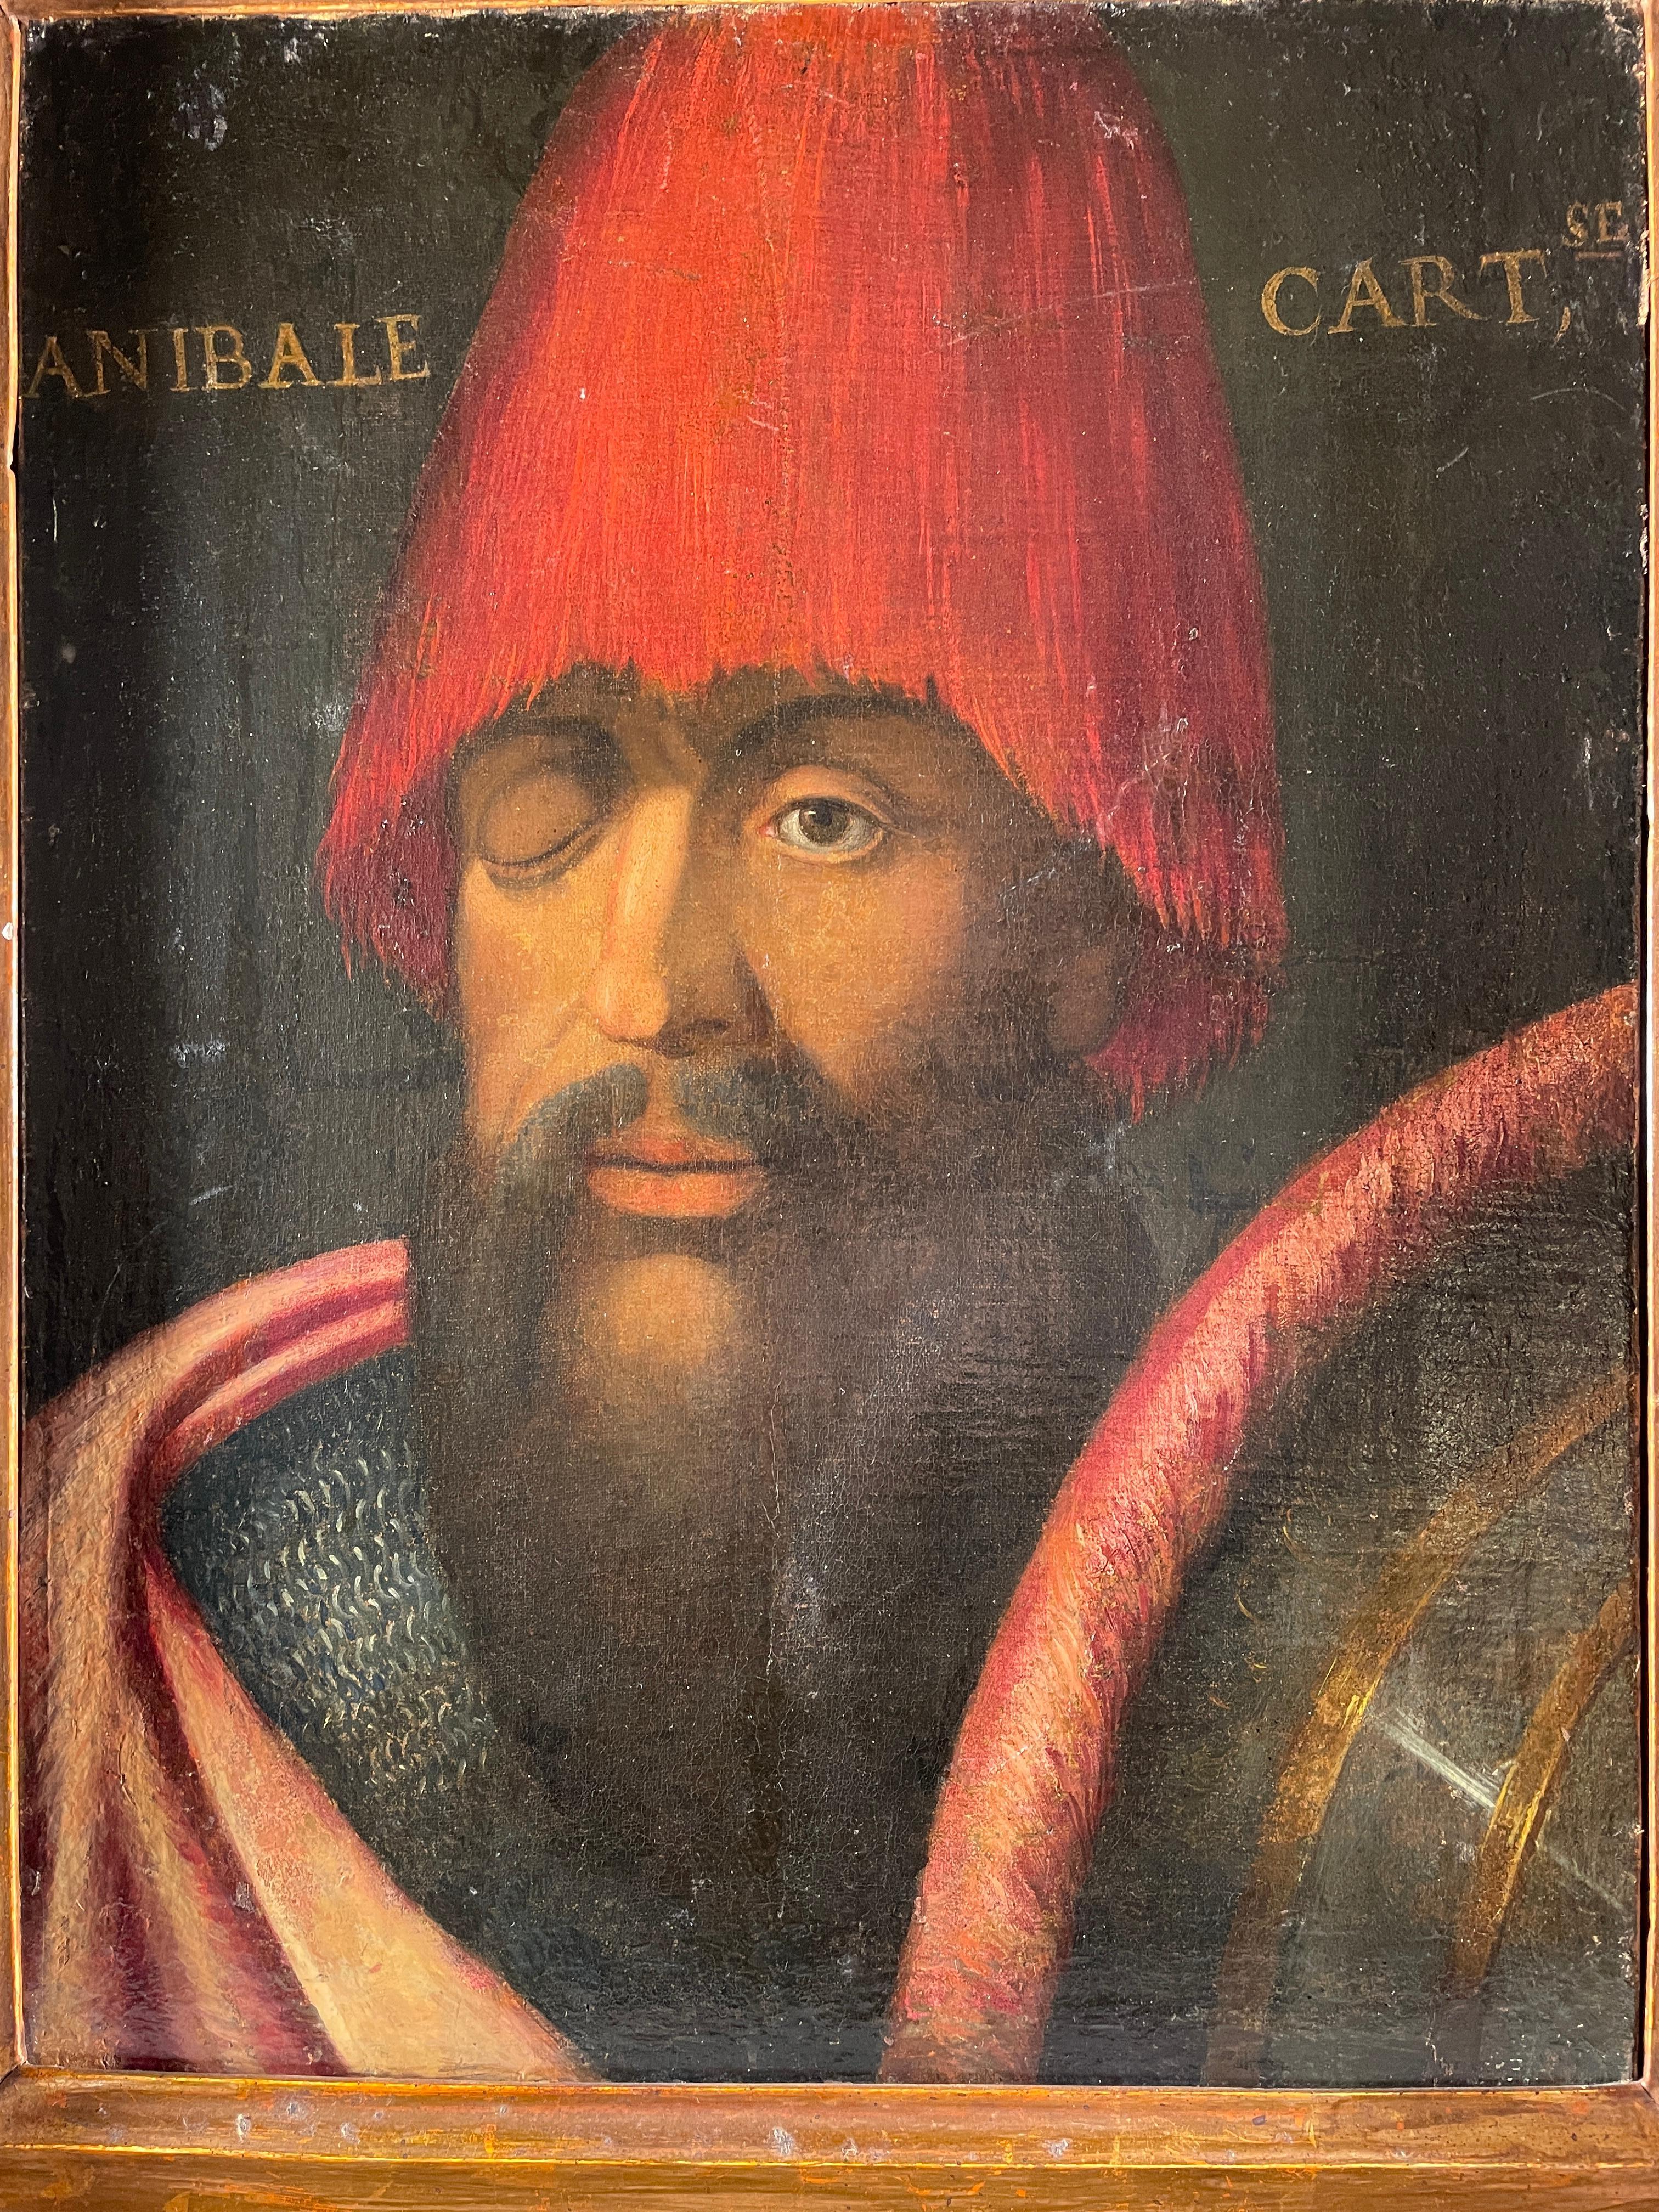 Portrait of Hannibal Carthaginian general and leader -Carthage, 247 a. C. - 183 a. C.- oil painting on canvas by Italian artist active in the Lombardy area of the early 1600s.
The setting of the work is inspired by the portrait of Hannibal by